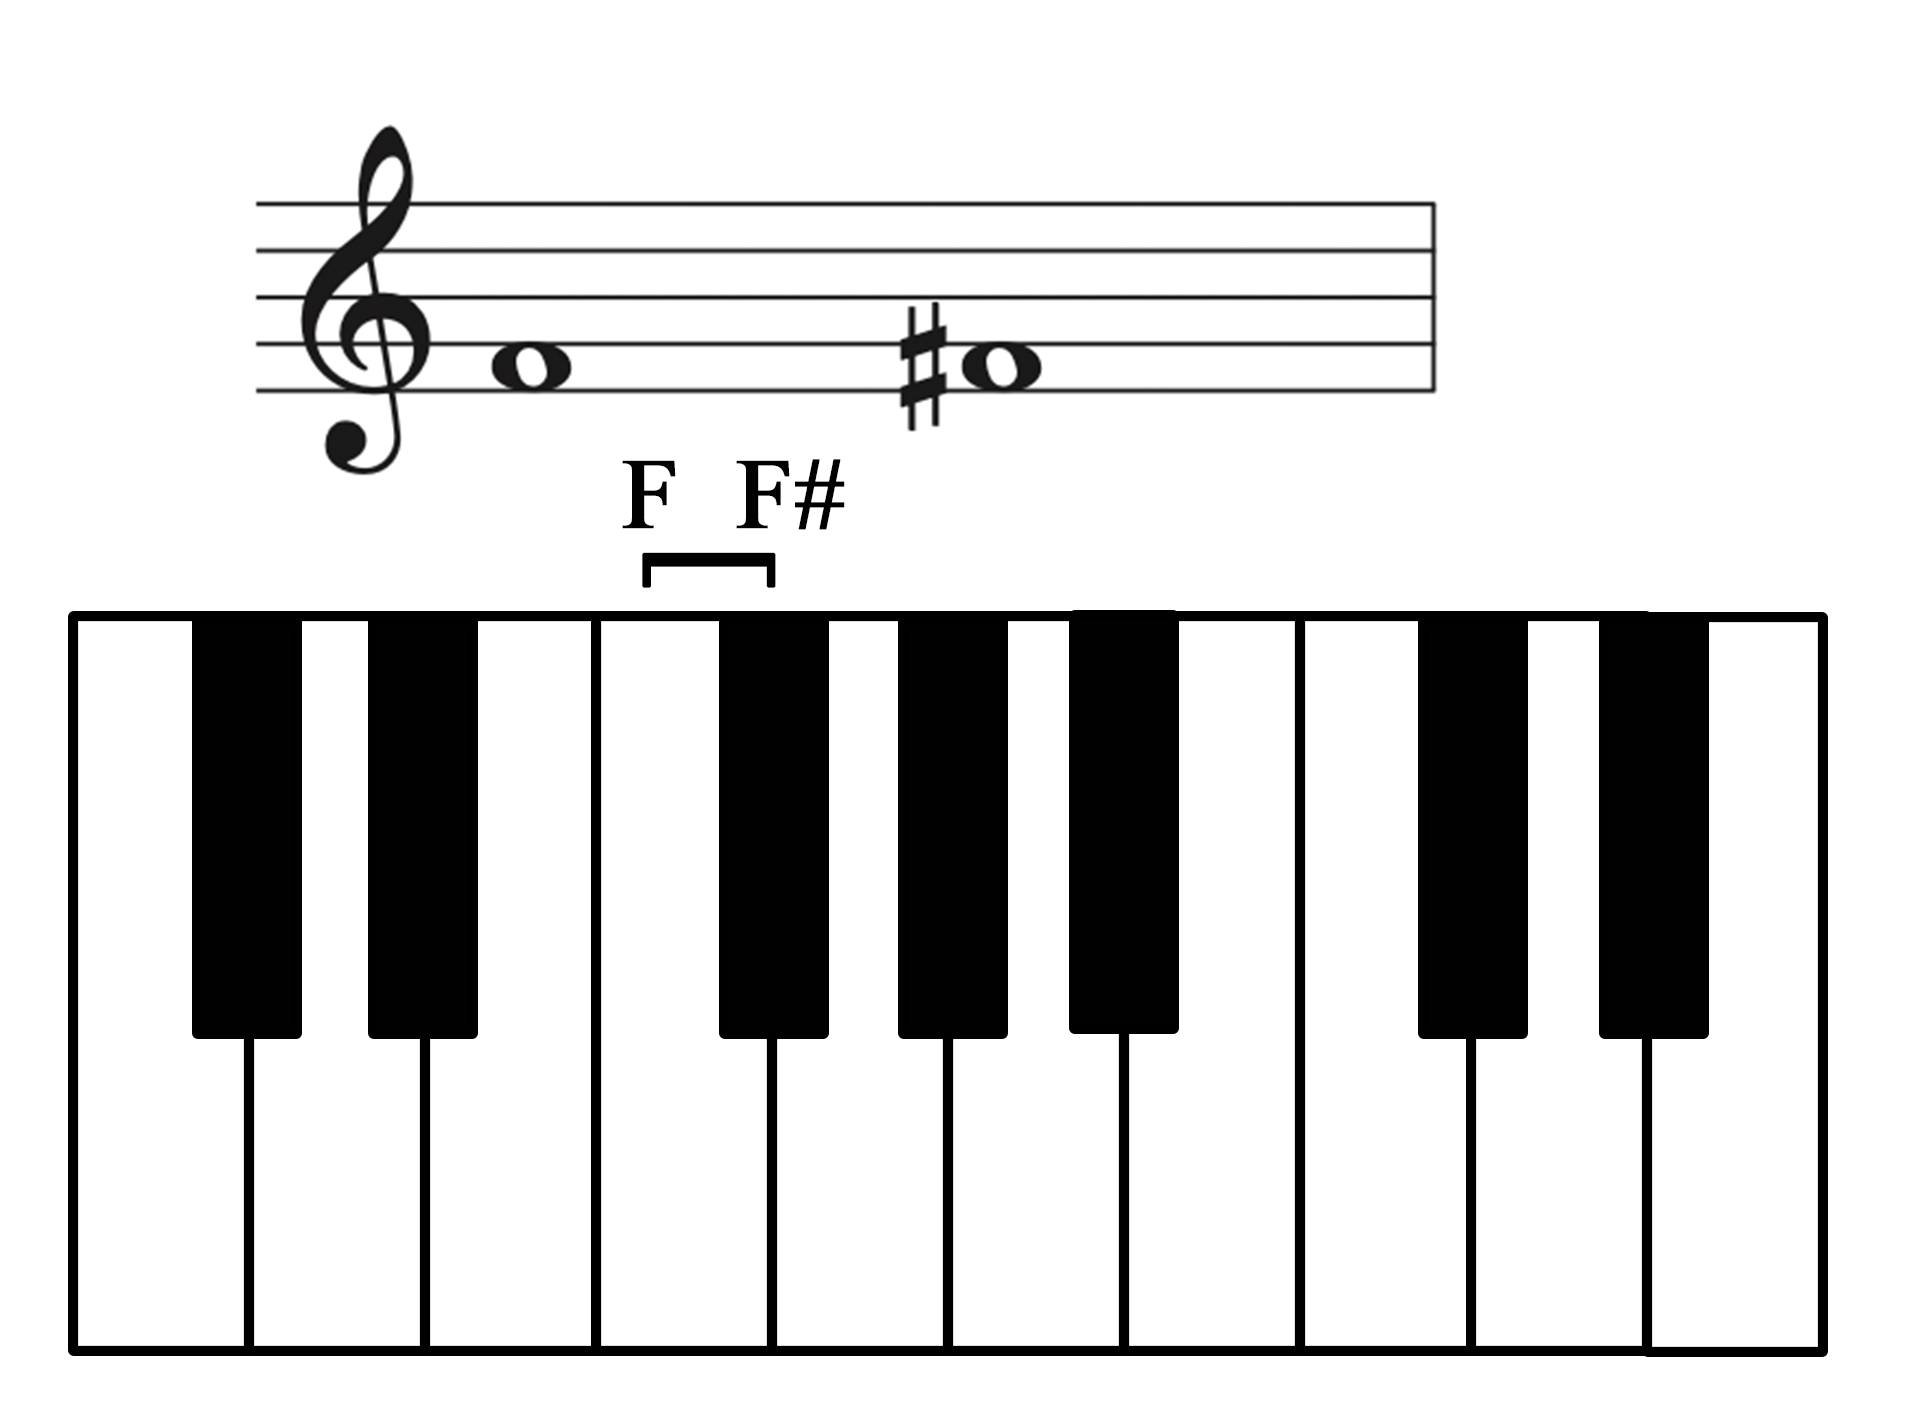 A keyboard with F to F-sharp labeled and shown on a staff.